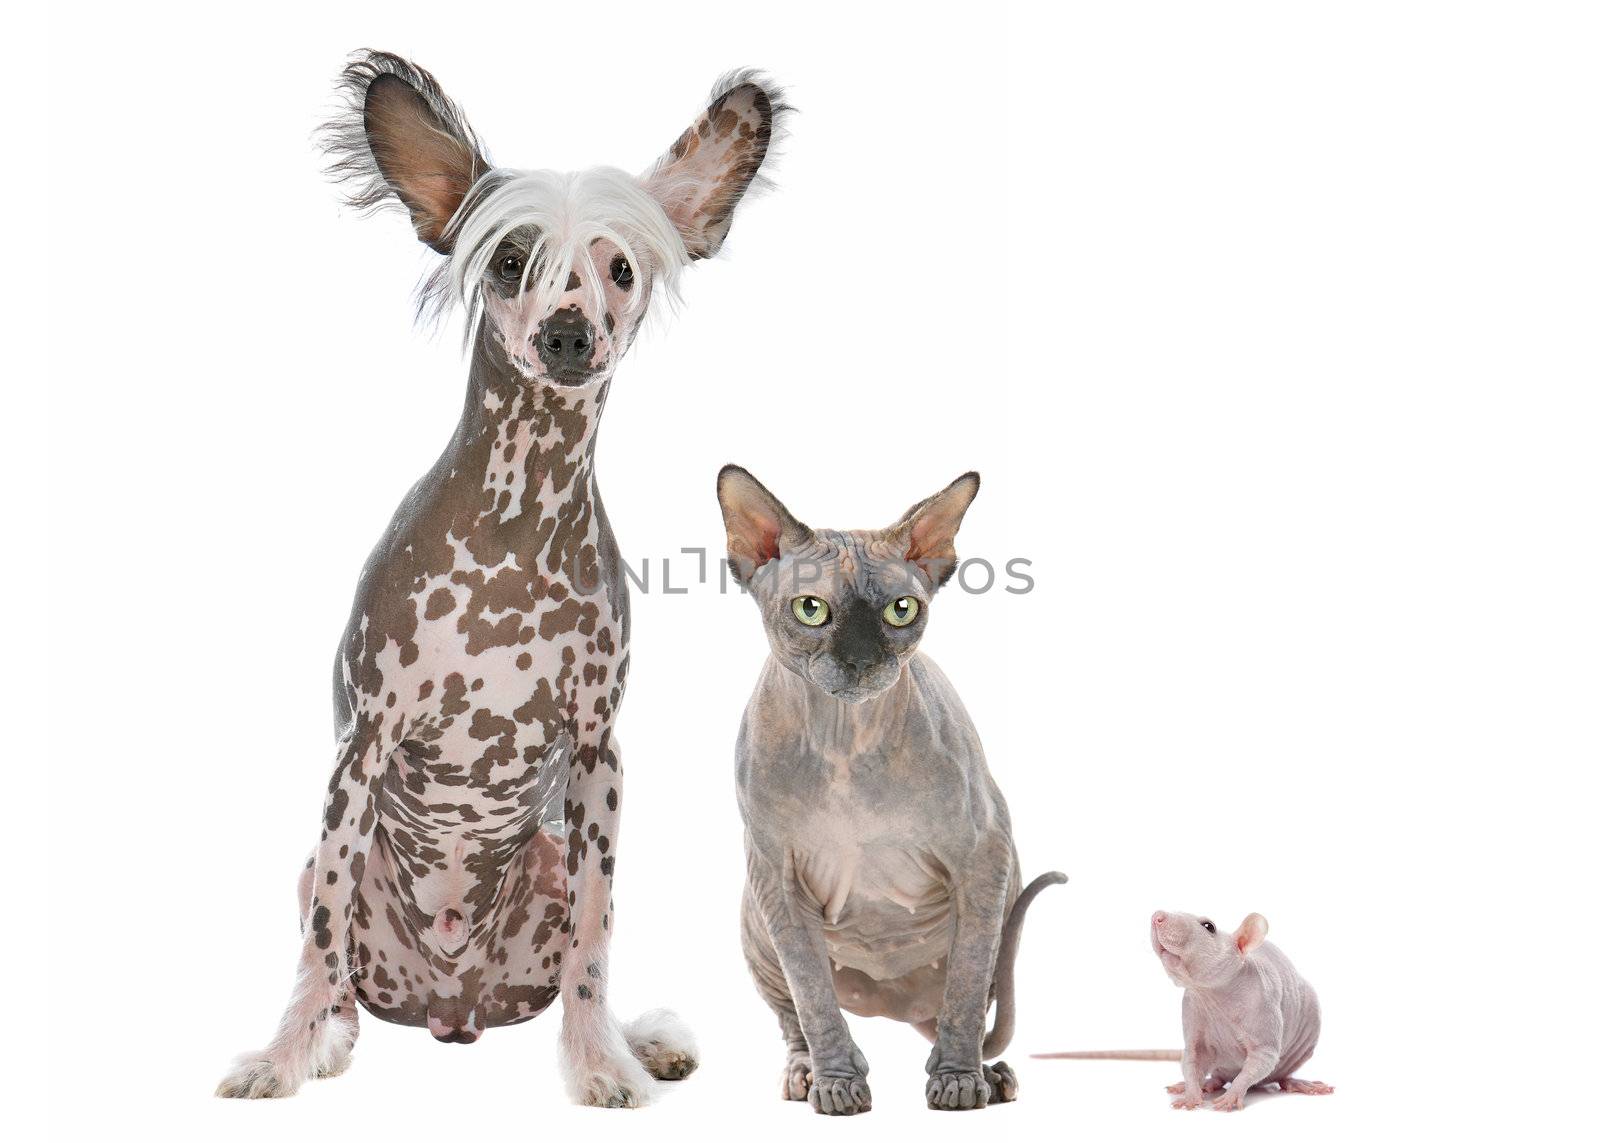 Naked Dog,Cat and Rat by eriklam